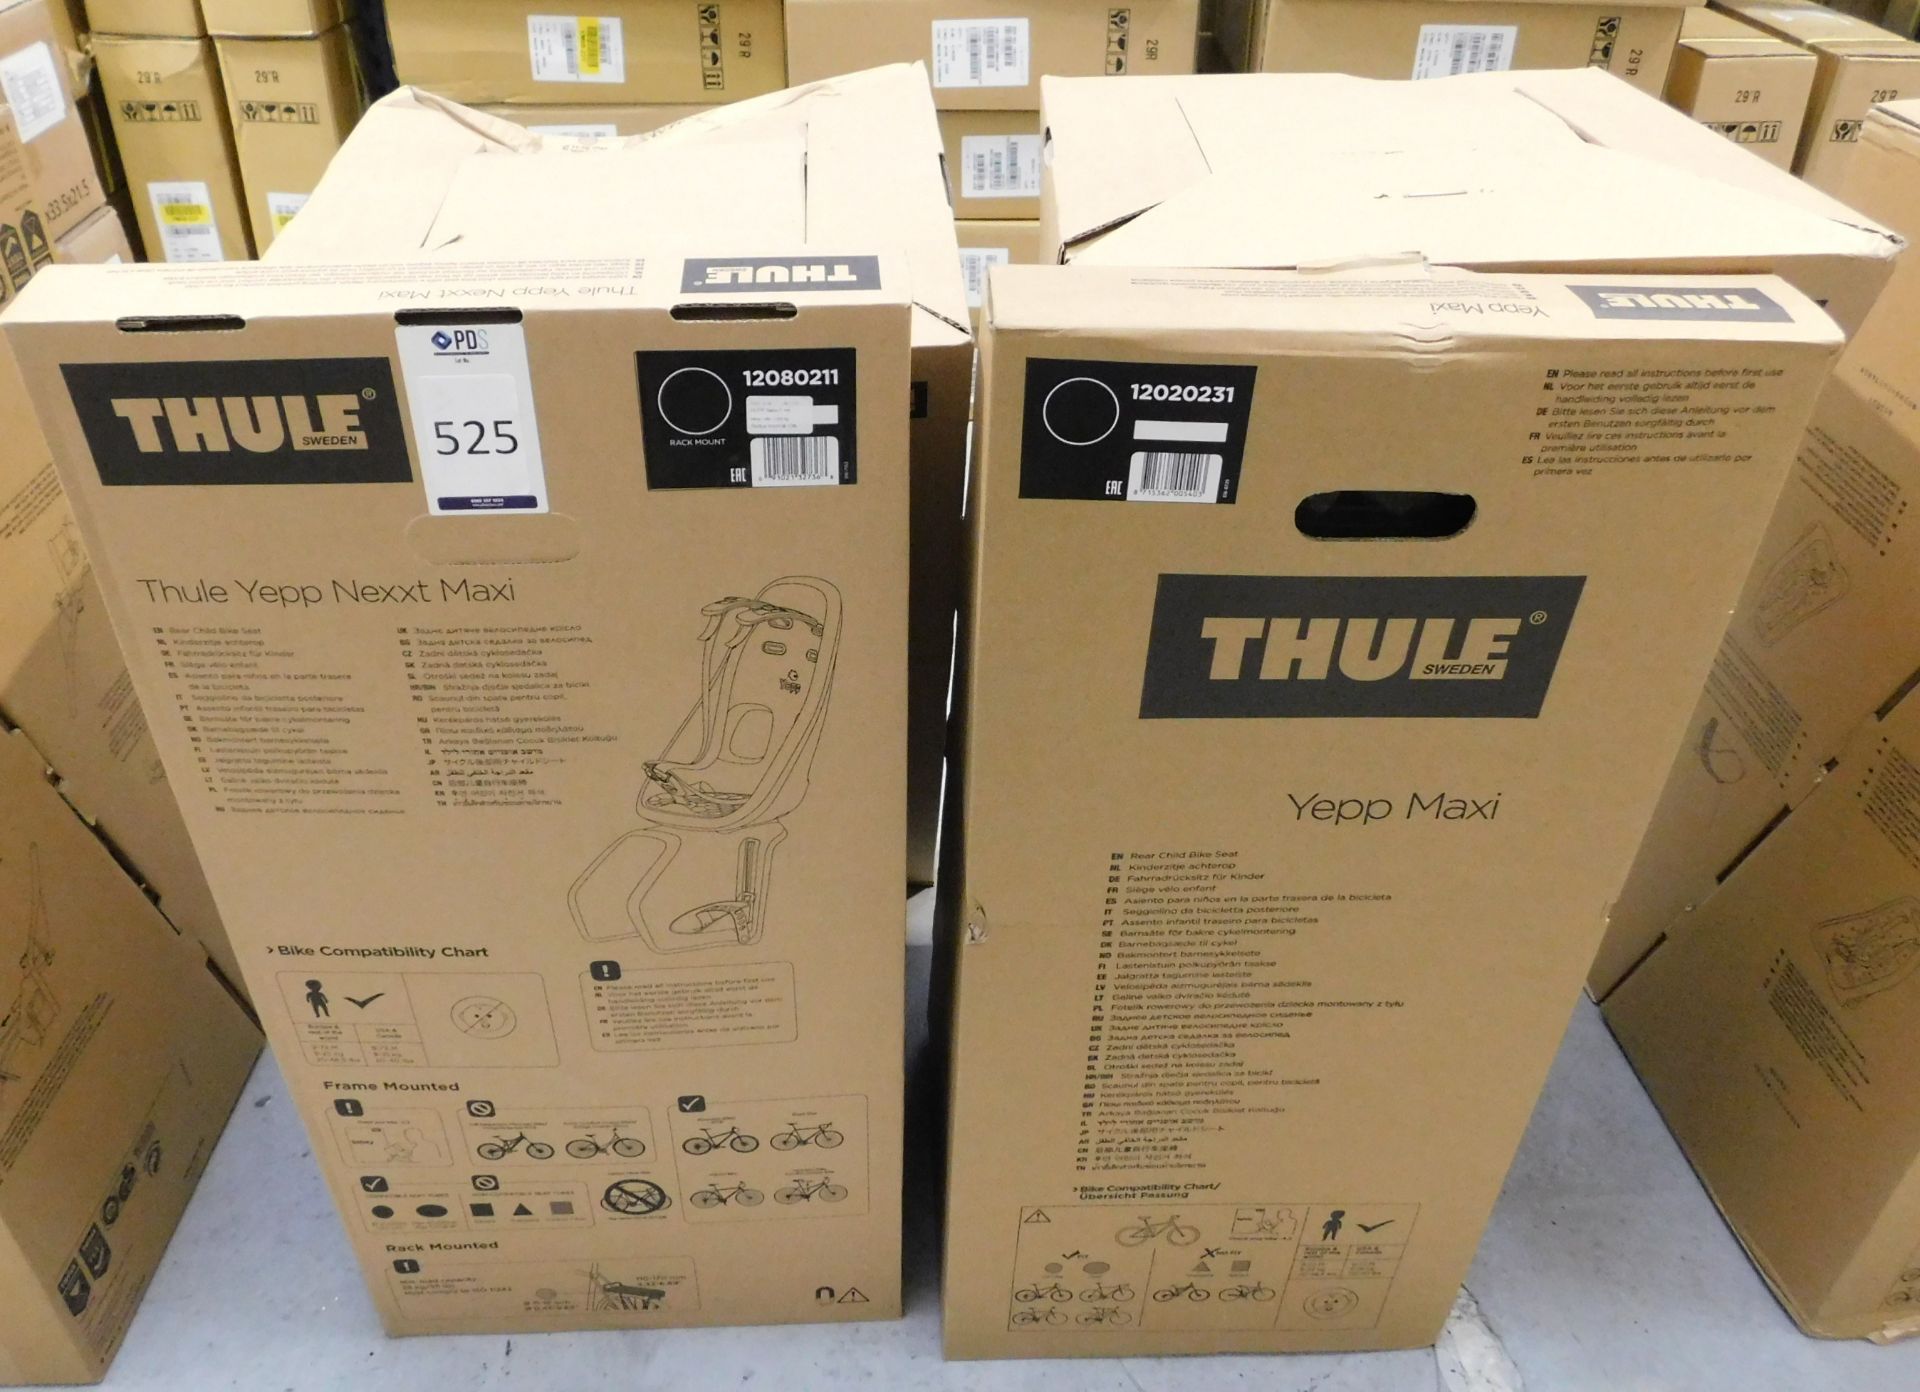 4 Thule YEPP Maxi Child Rear Seats (Location Park Royal N W London. Please Refer to General Notes)